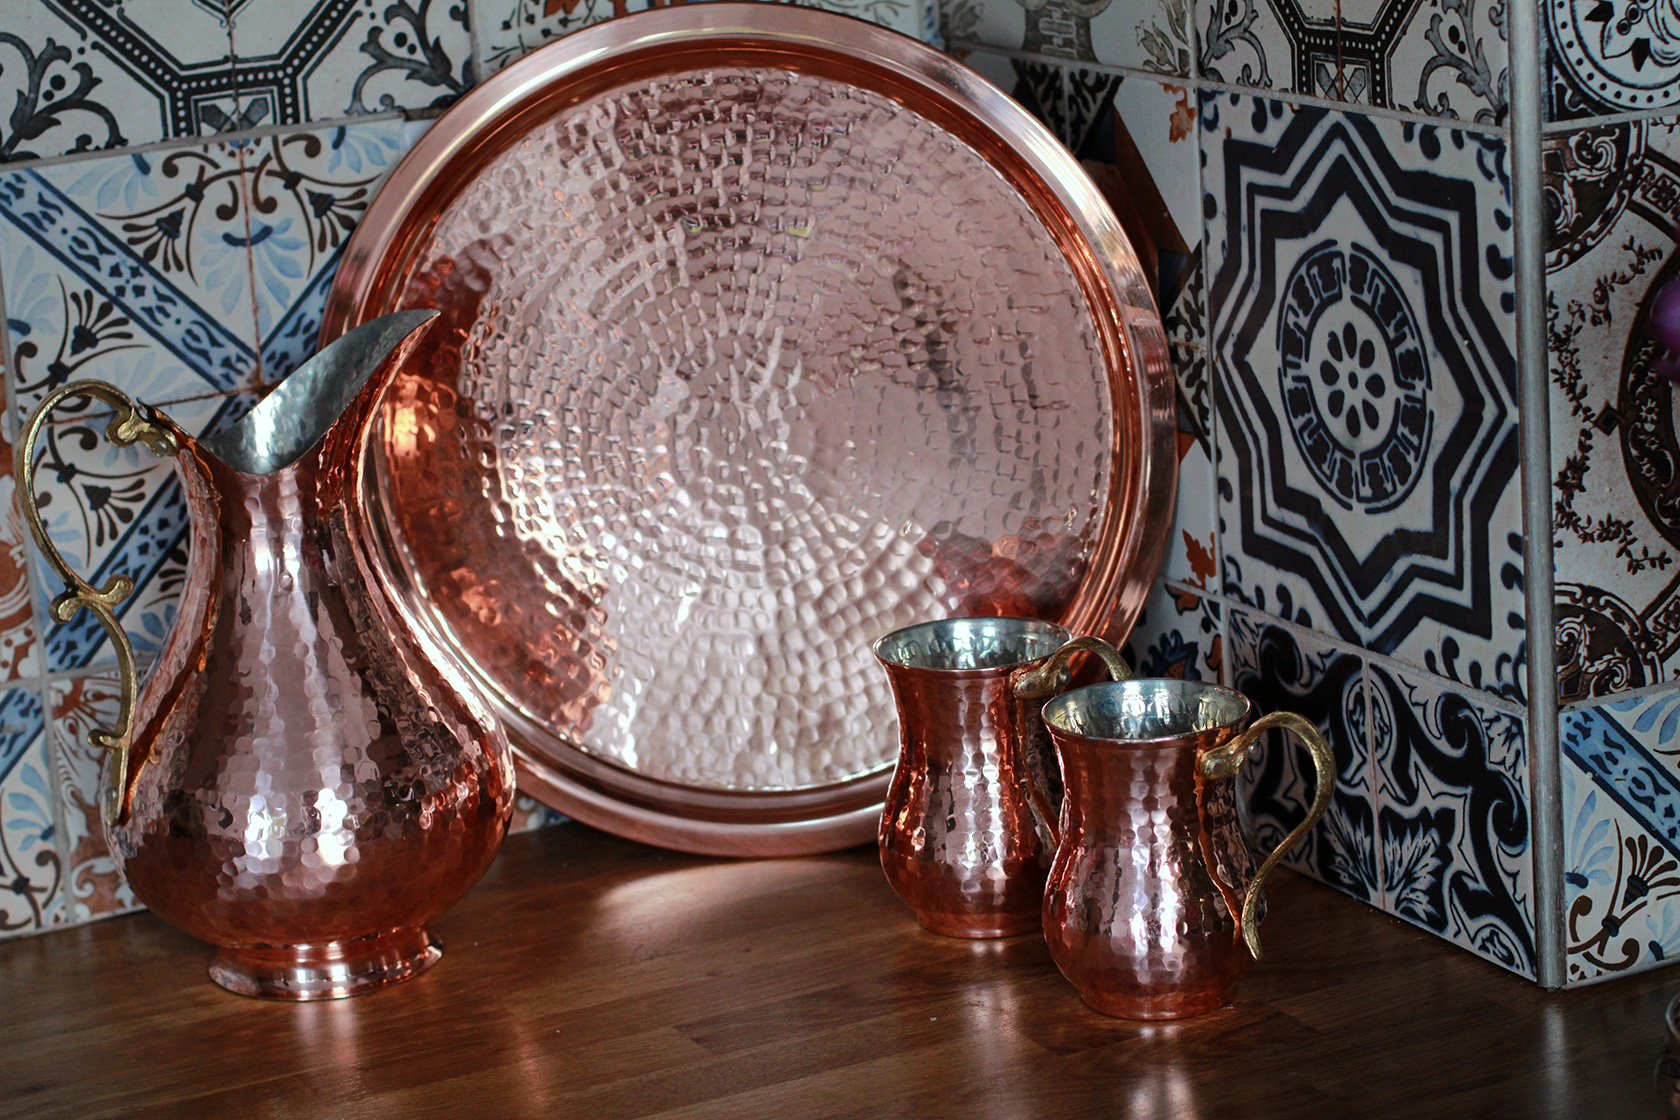 Hammered Copper Pitcher Set with Tumblers